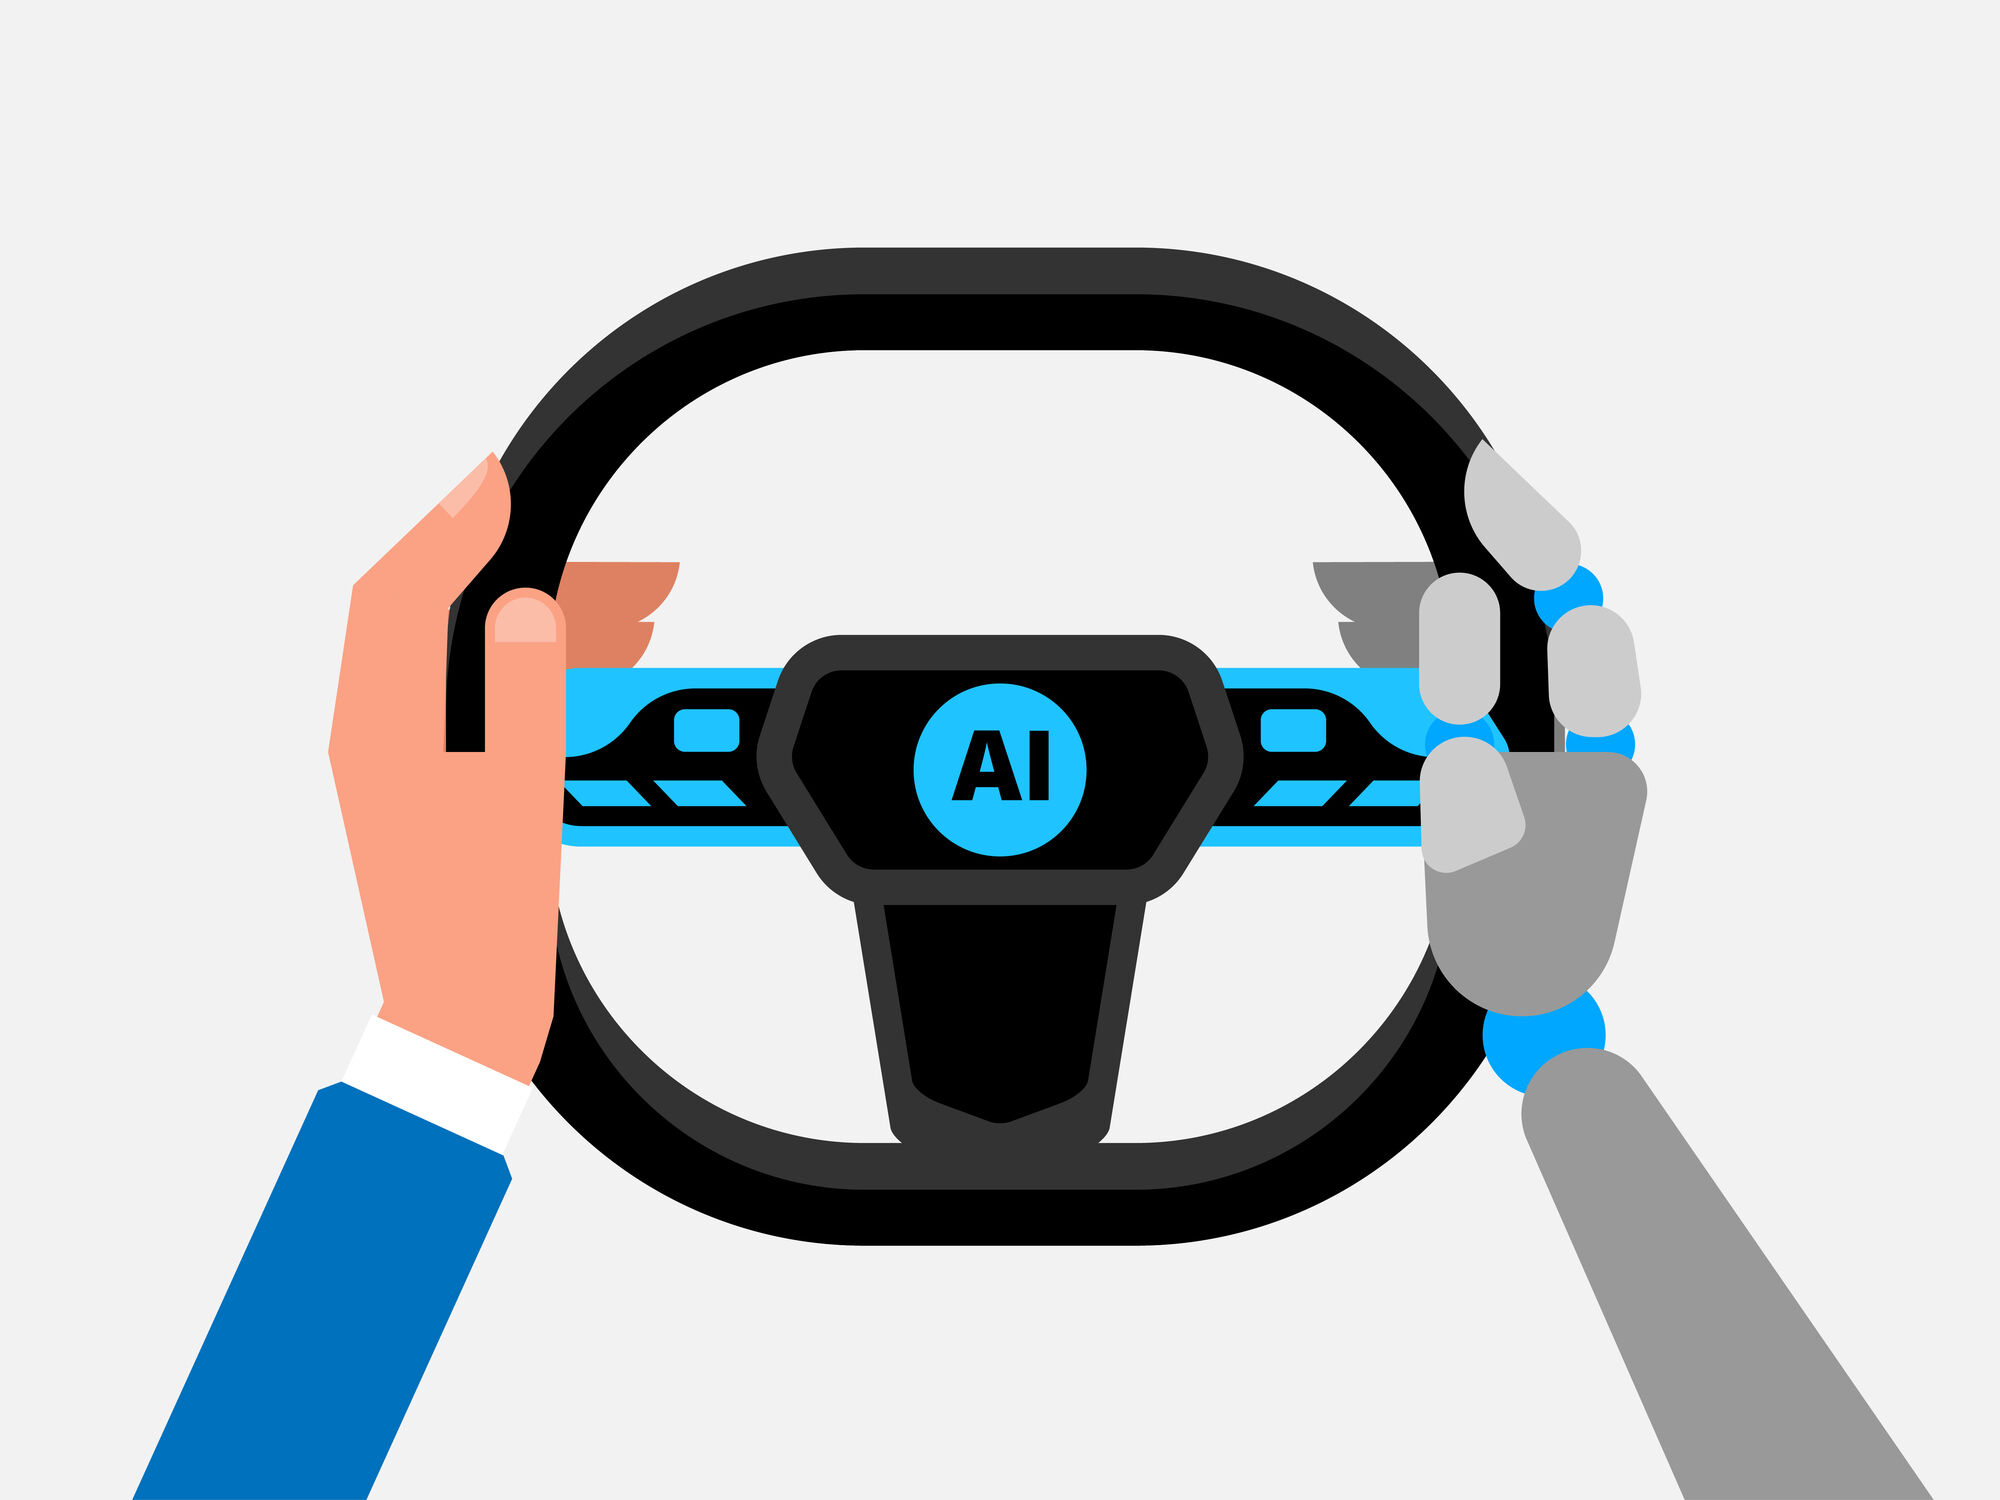 Drawing of a steering wheel with a human hand and a robotic hand